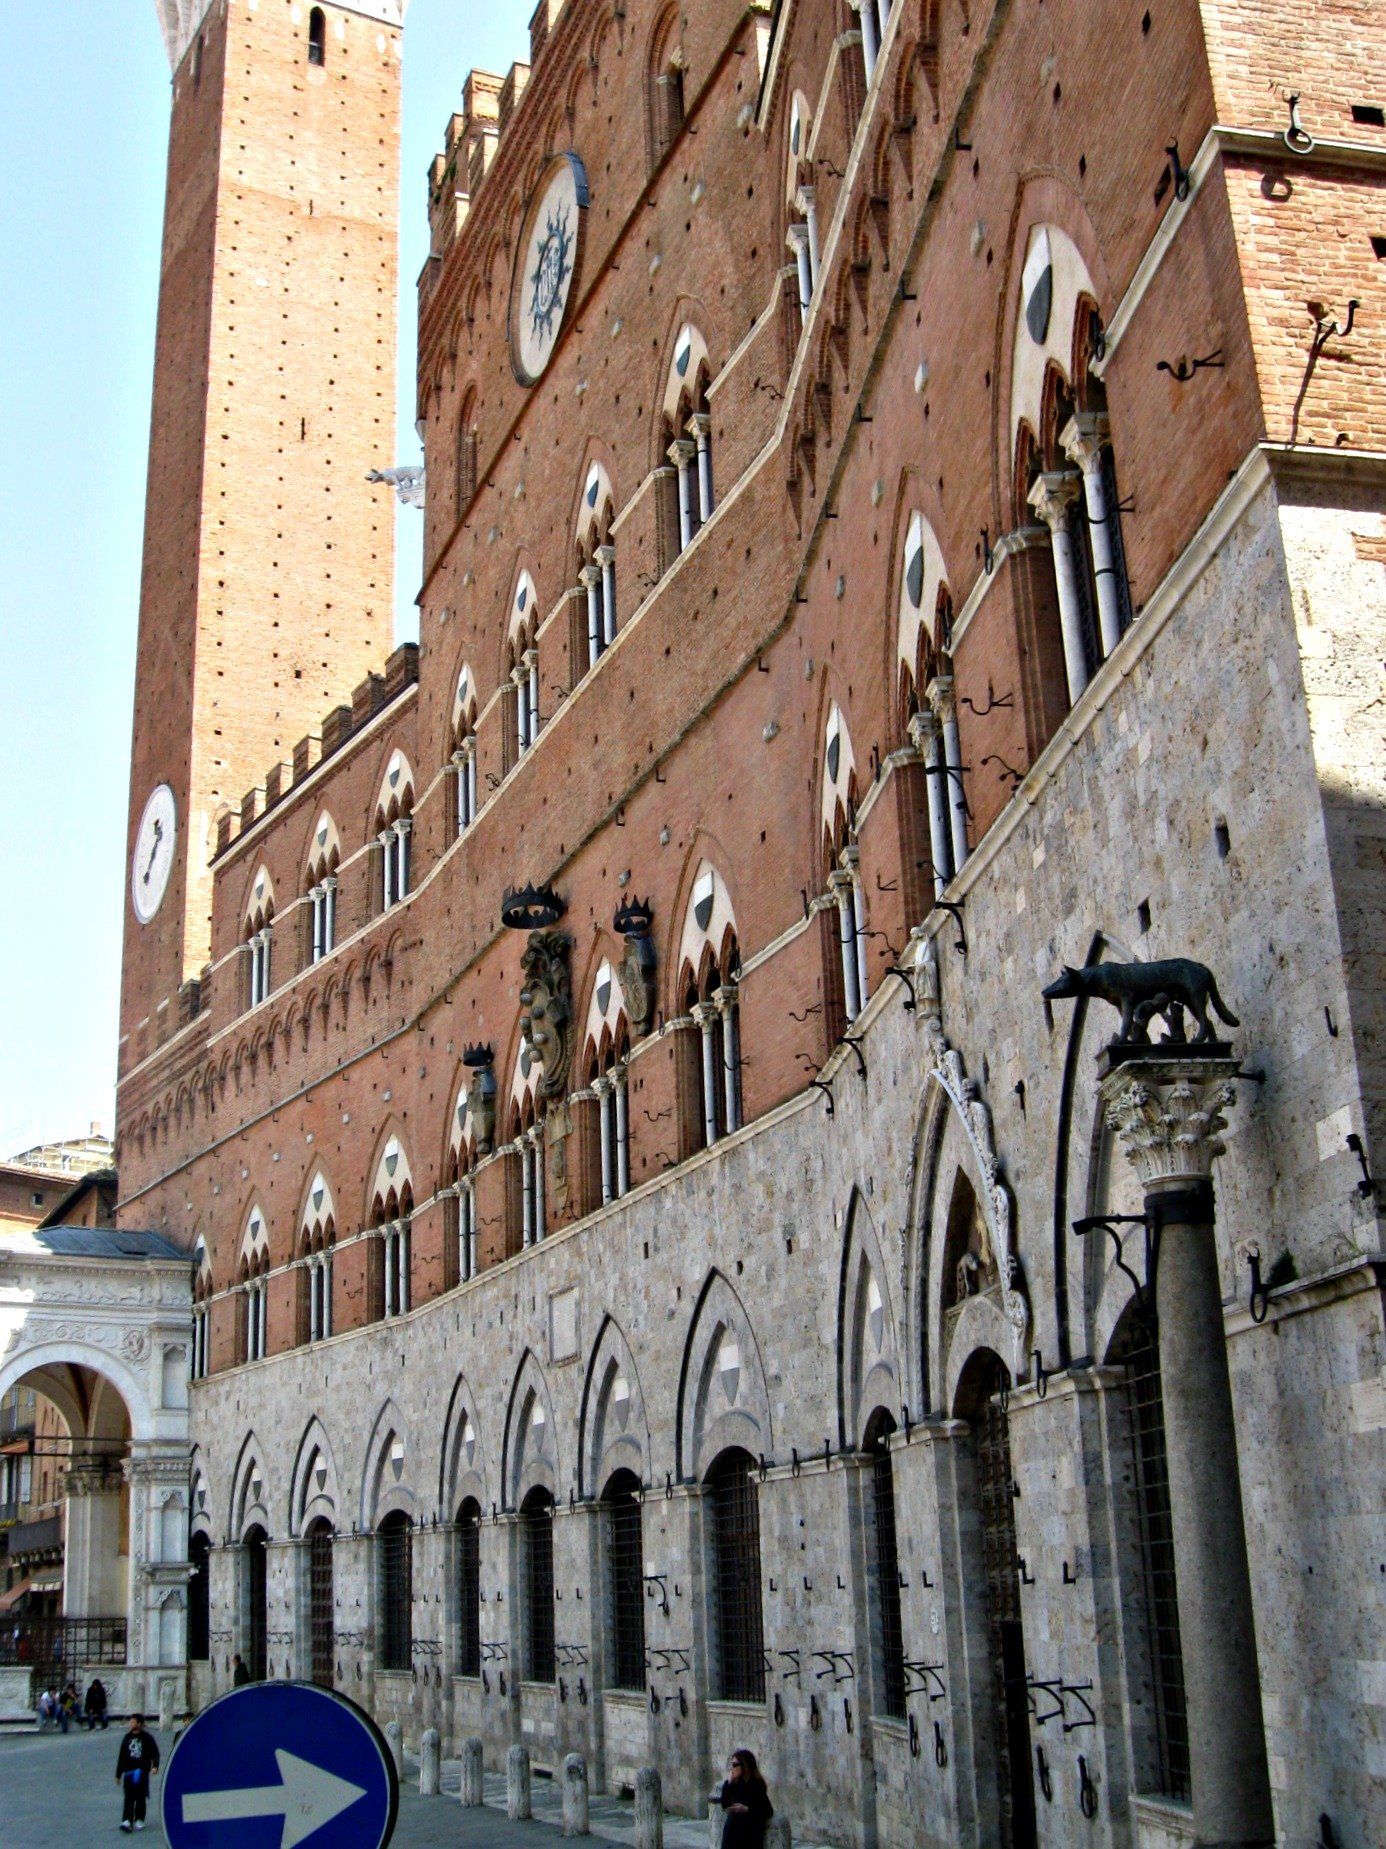 Curved wall of the Palazzo Pubblico